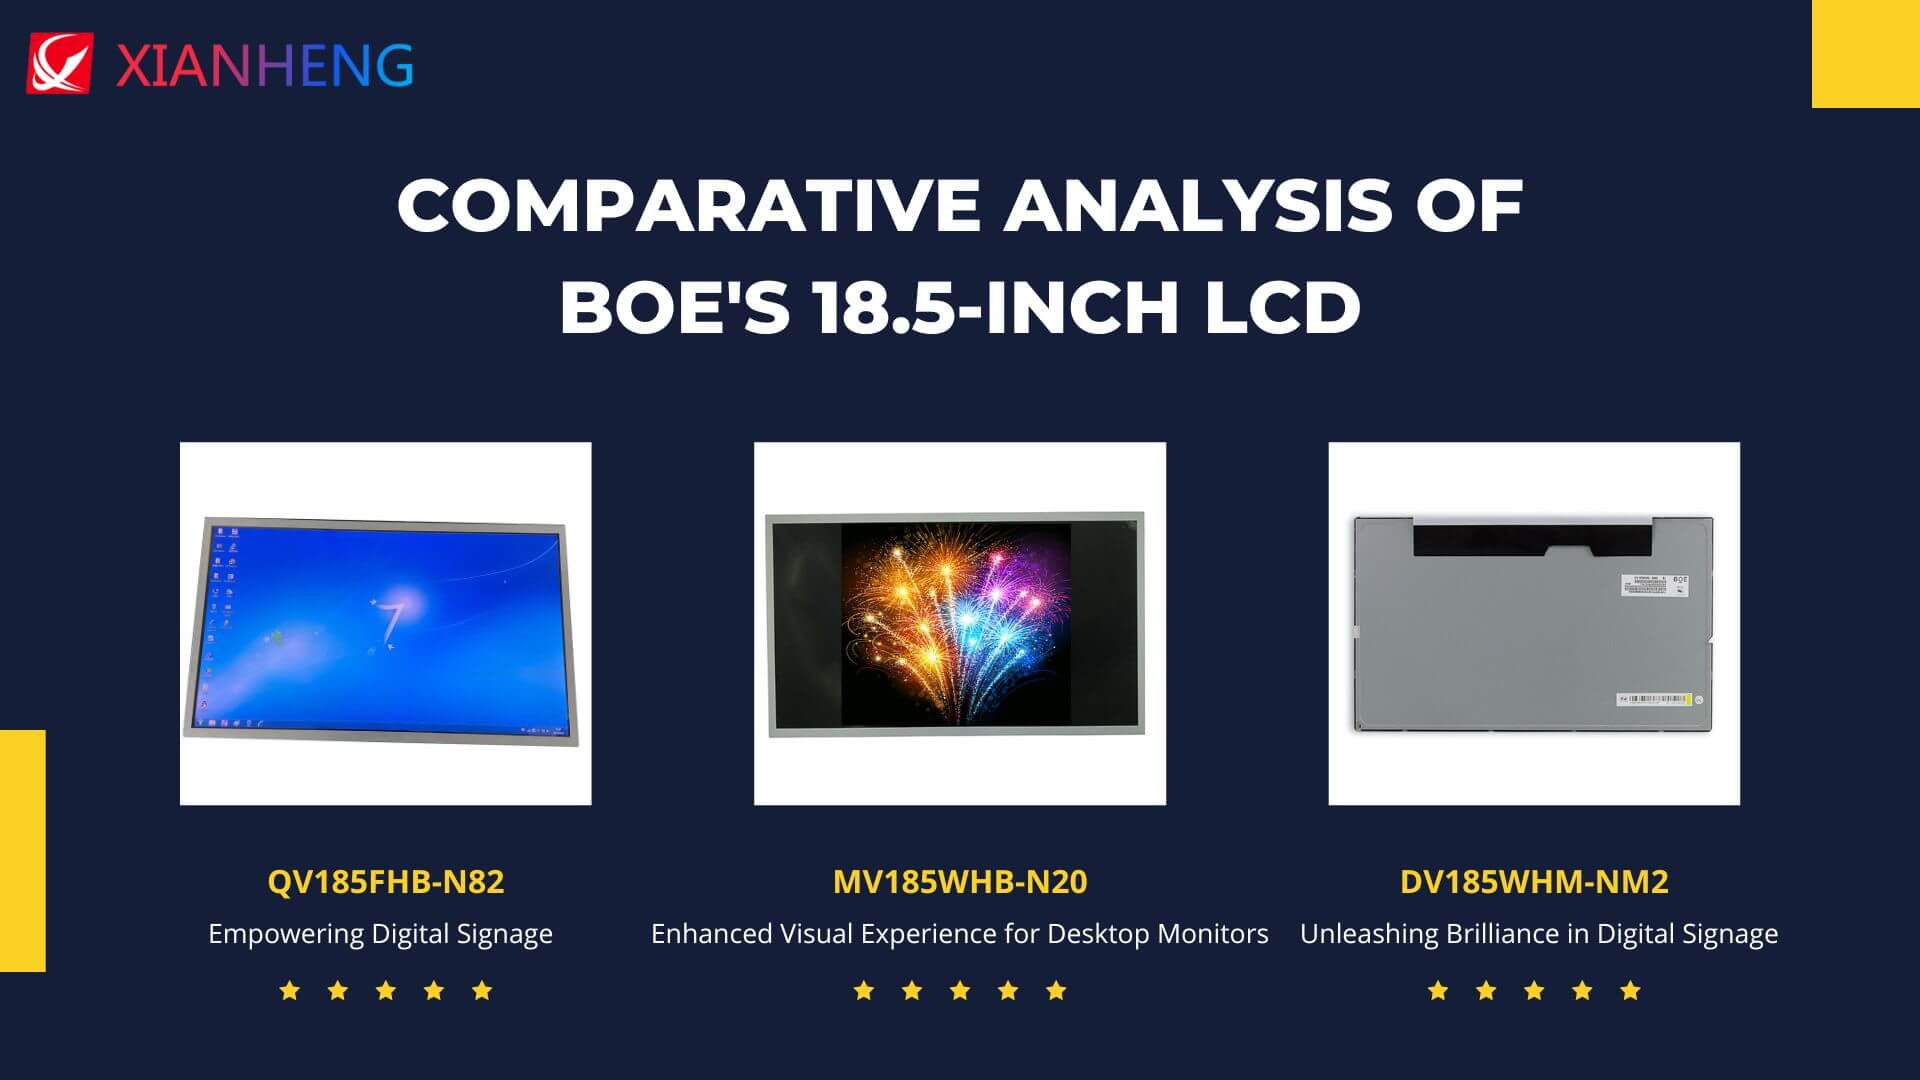 BOE 18.5-Inch LCD Display Panels: Unveiling High-Performance Solutions for Digital Signage and More